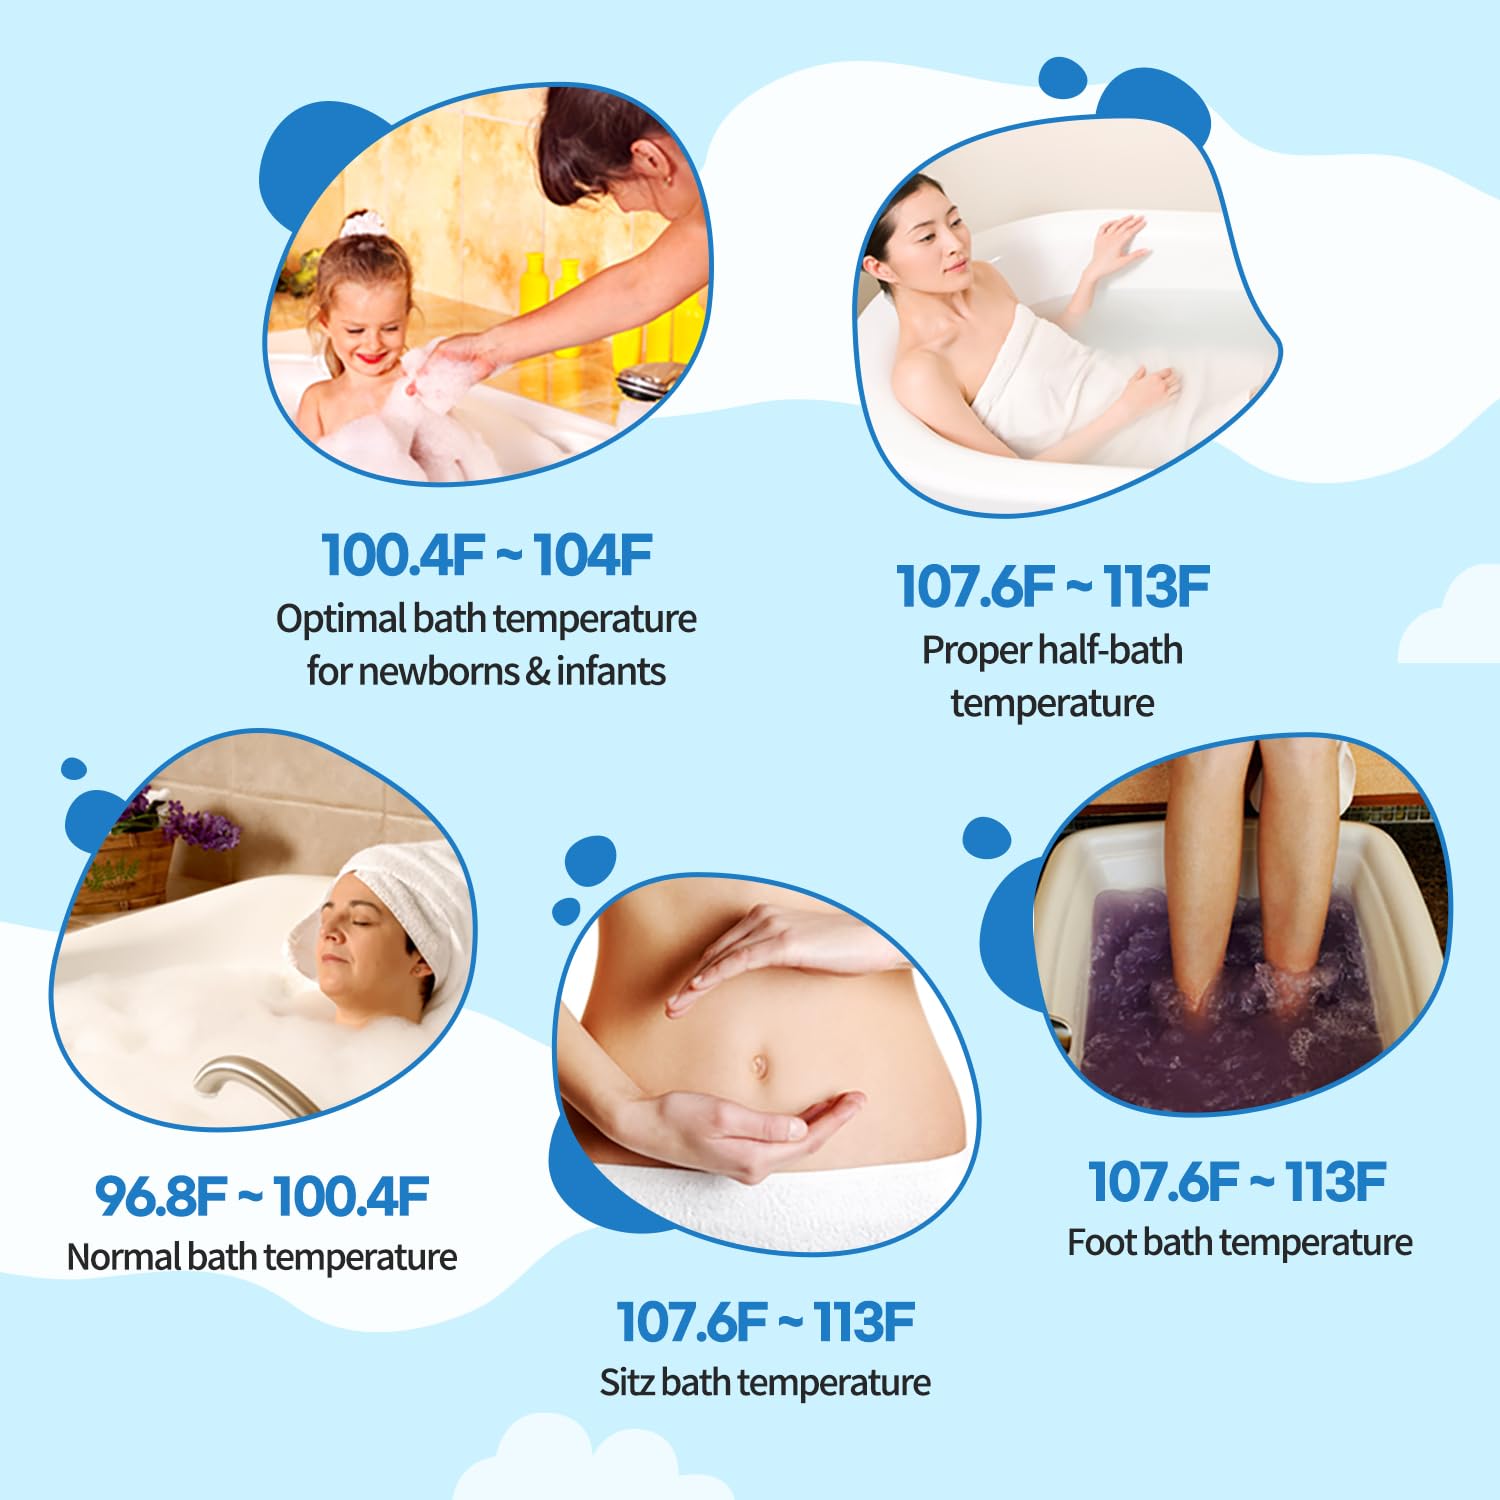 HubiBaby Baby Bath Thermometer & Digital Room Temperature, 2in1 Kids Bathroom Safety Products with Temperature Warning, Floating Teddy Bear (Khaki) : Baby